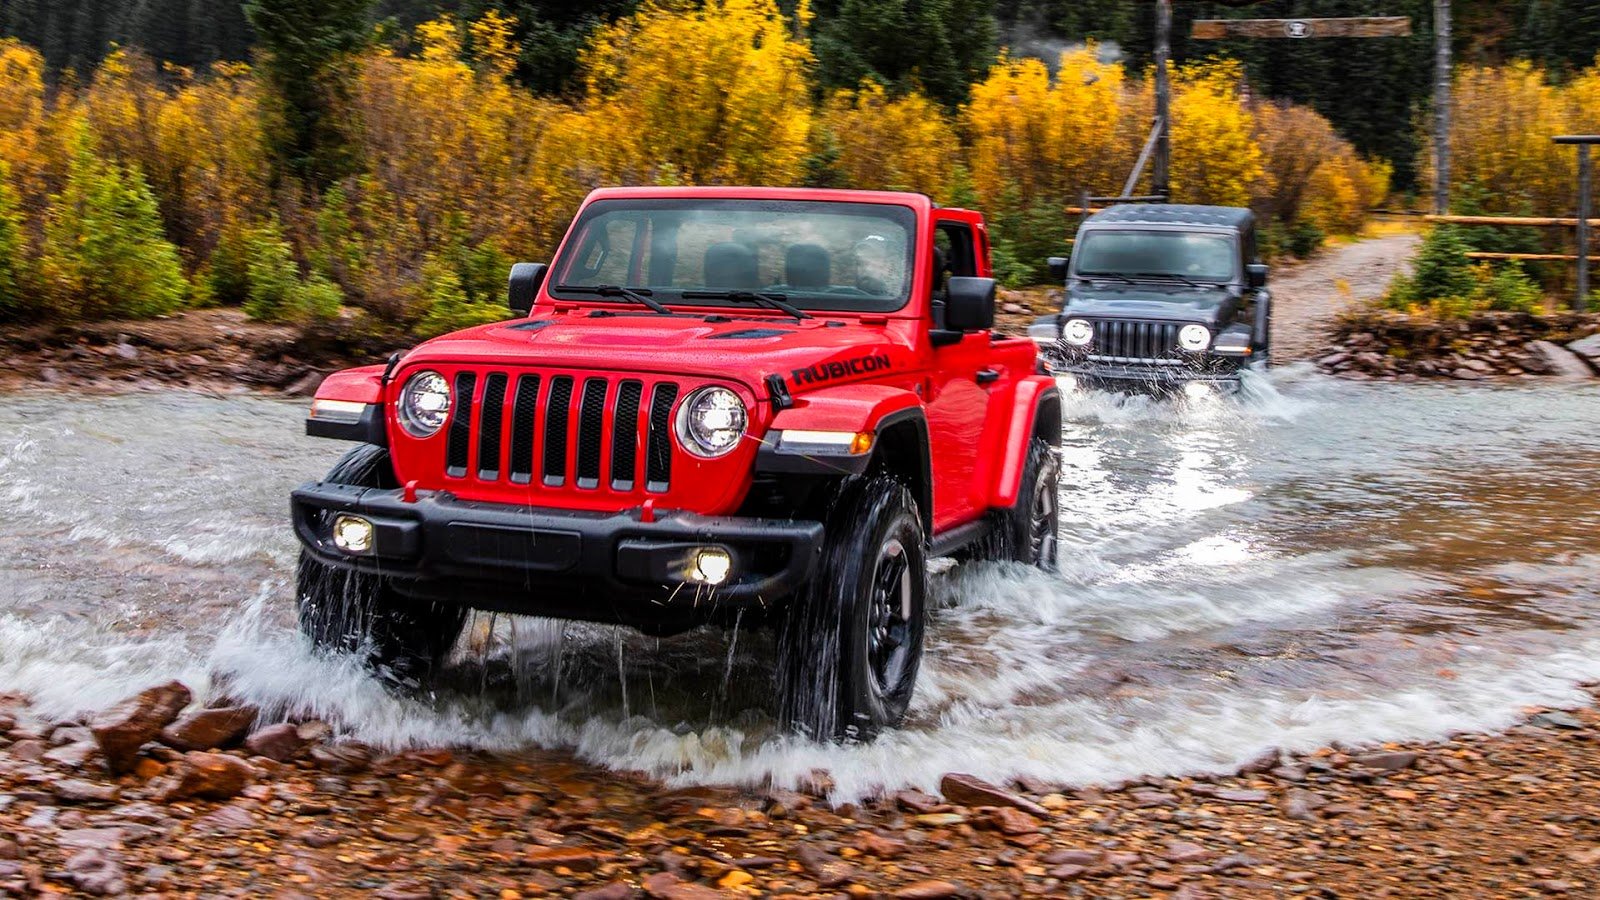 2018 Jeep Wrangler is 200-lb lighter, gains 268-hp  turbo engine |  DriveMag Cars